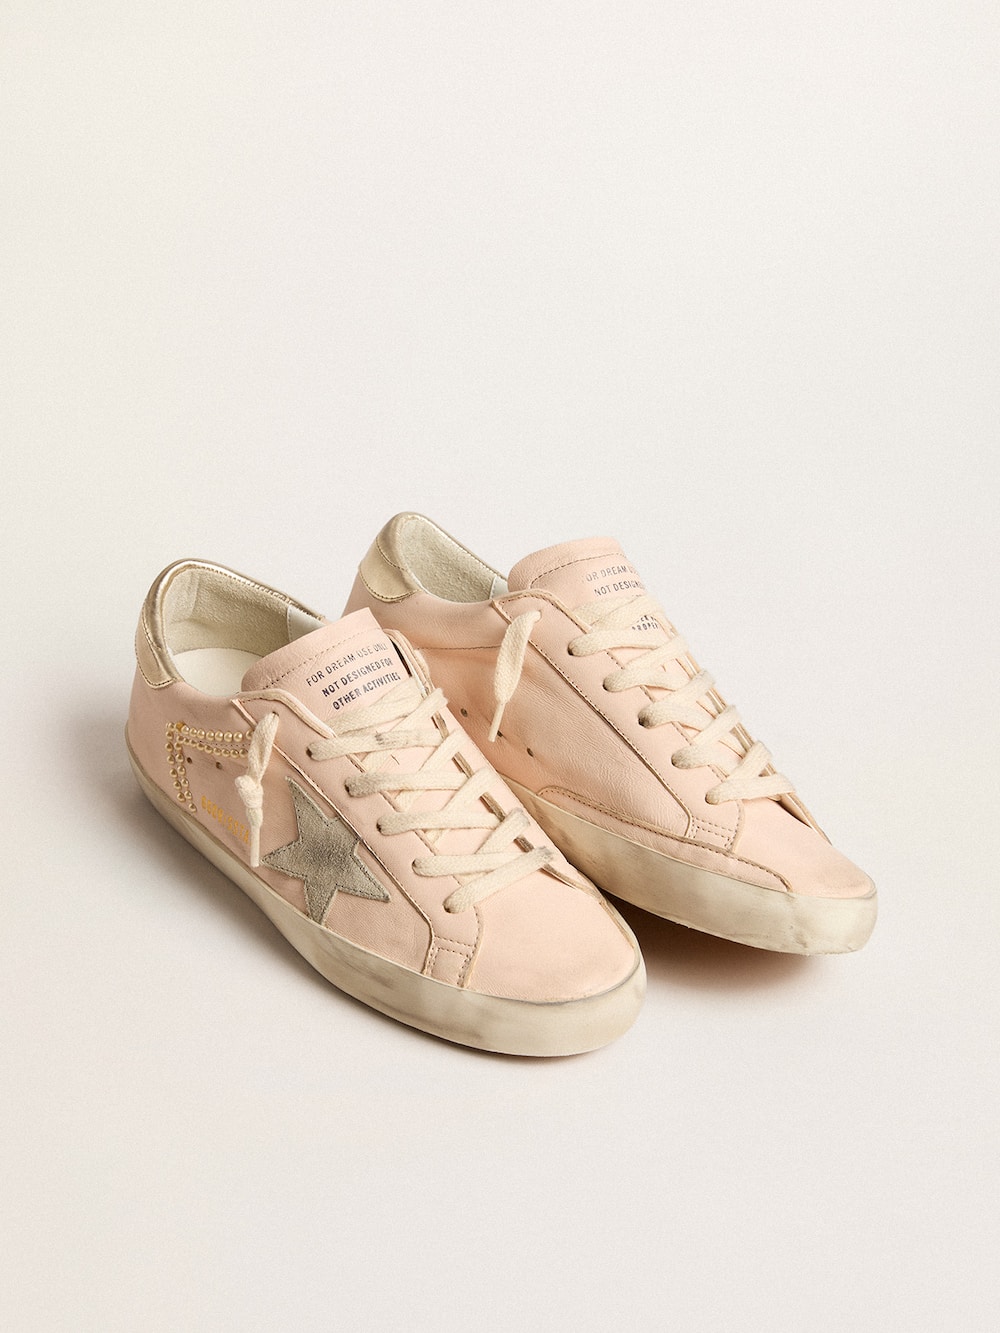 Golden Goose - Super-Star in pink nappa with ice-gray star and platinum heel tab in 